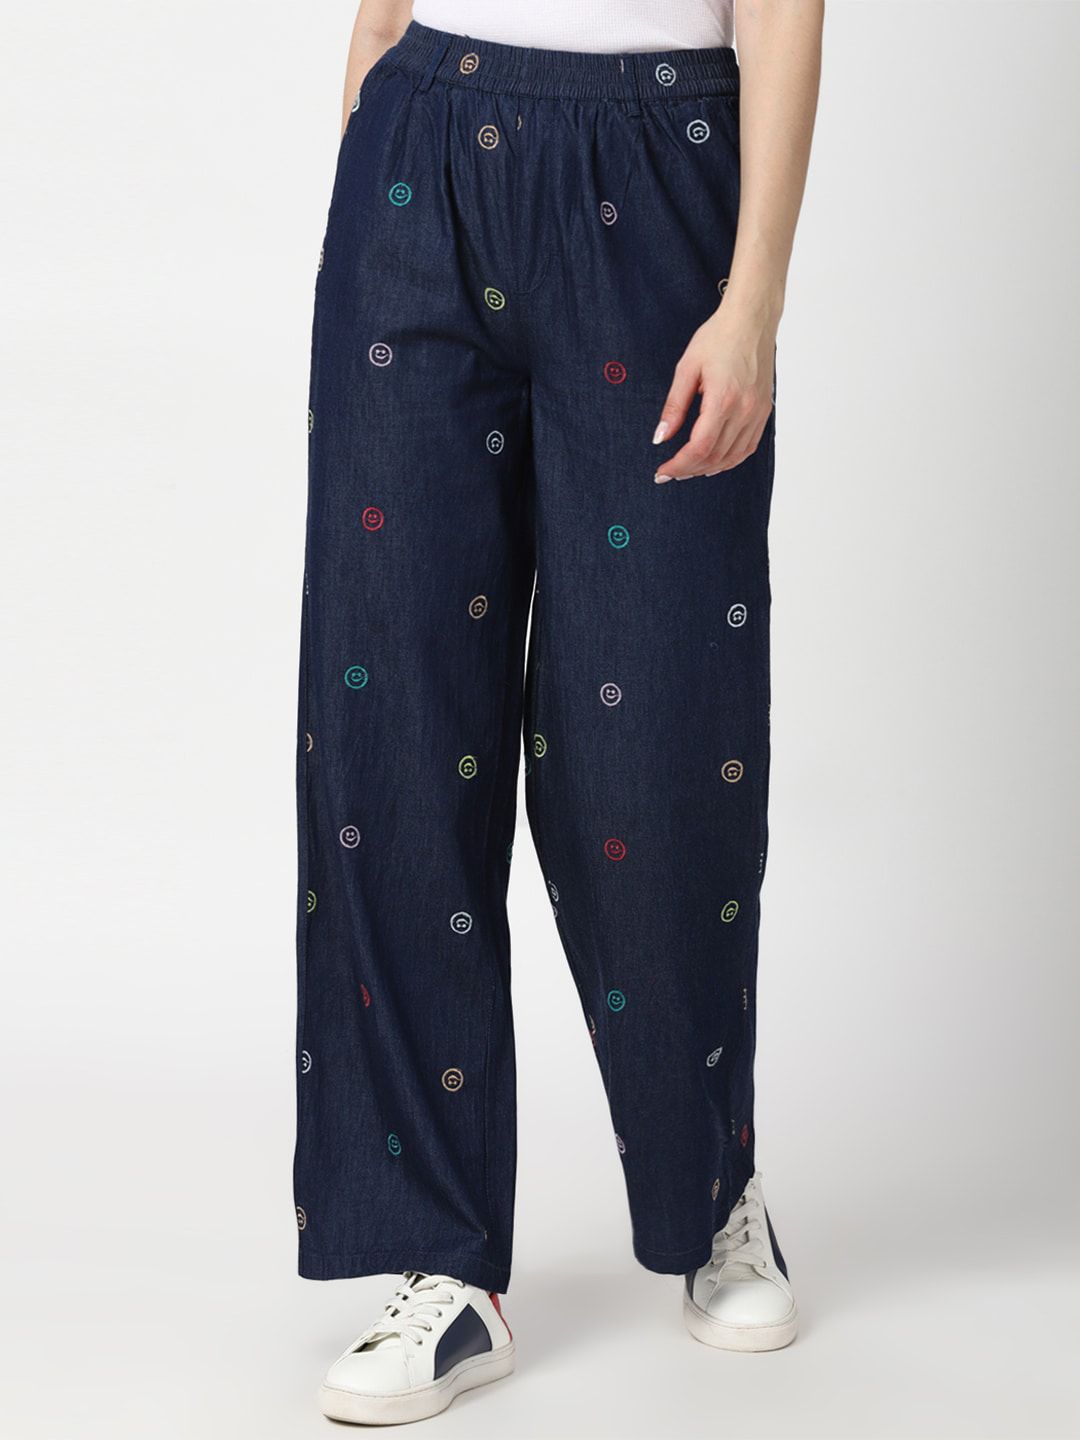 FOREVER 21 Women Navy Blue Printed Trousers Price in India